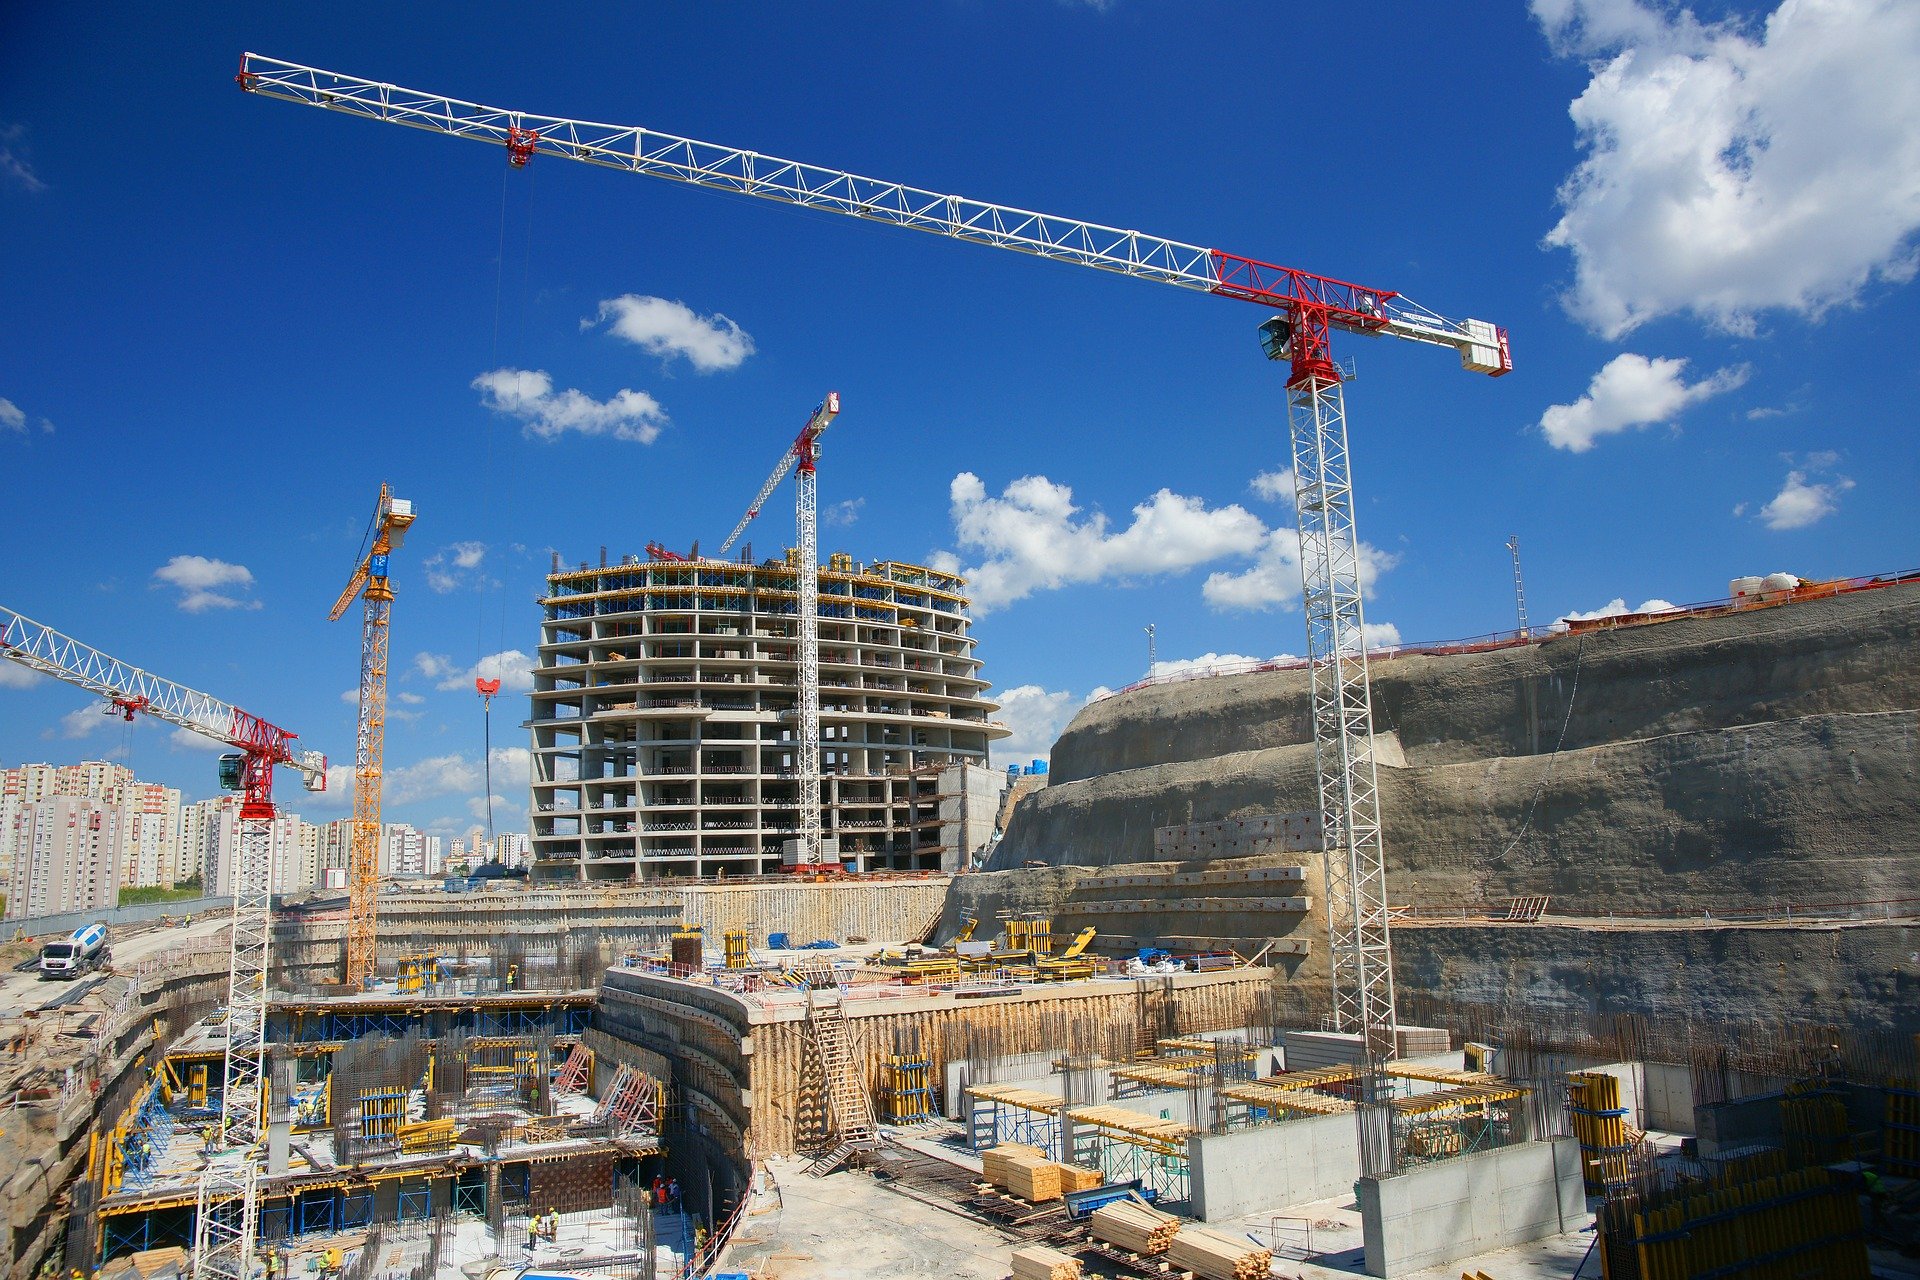 Five largest construction projects initiated in Vietnam in Q1 2022